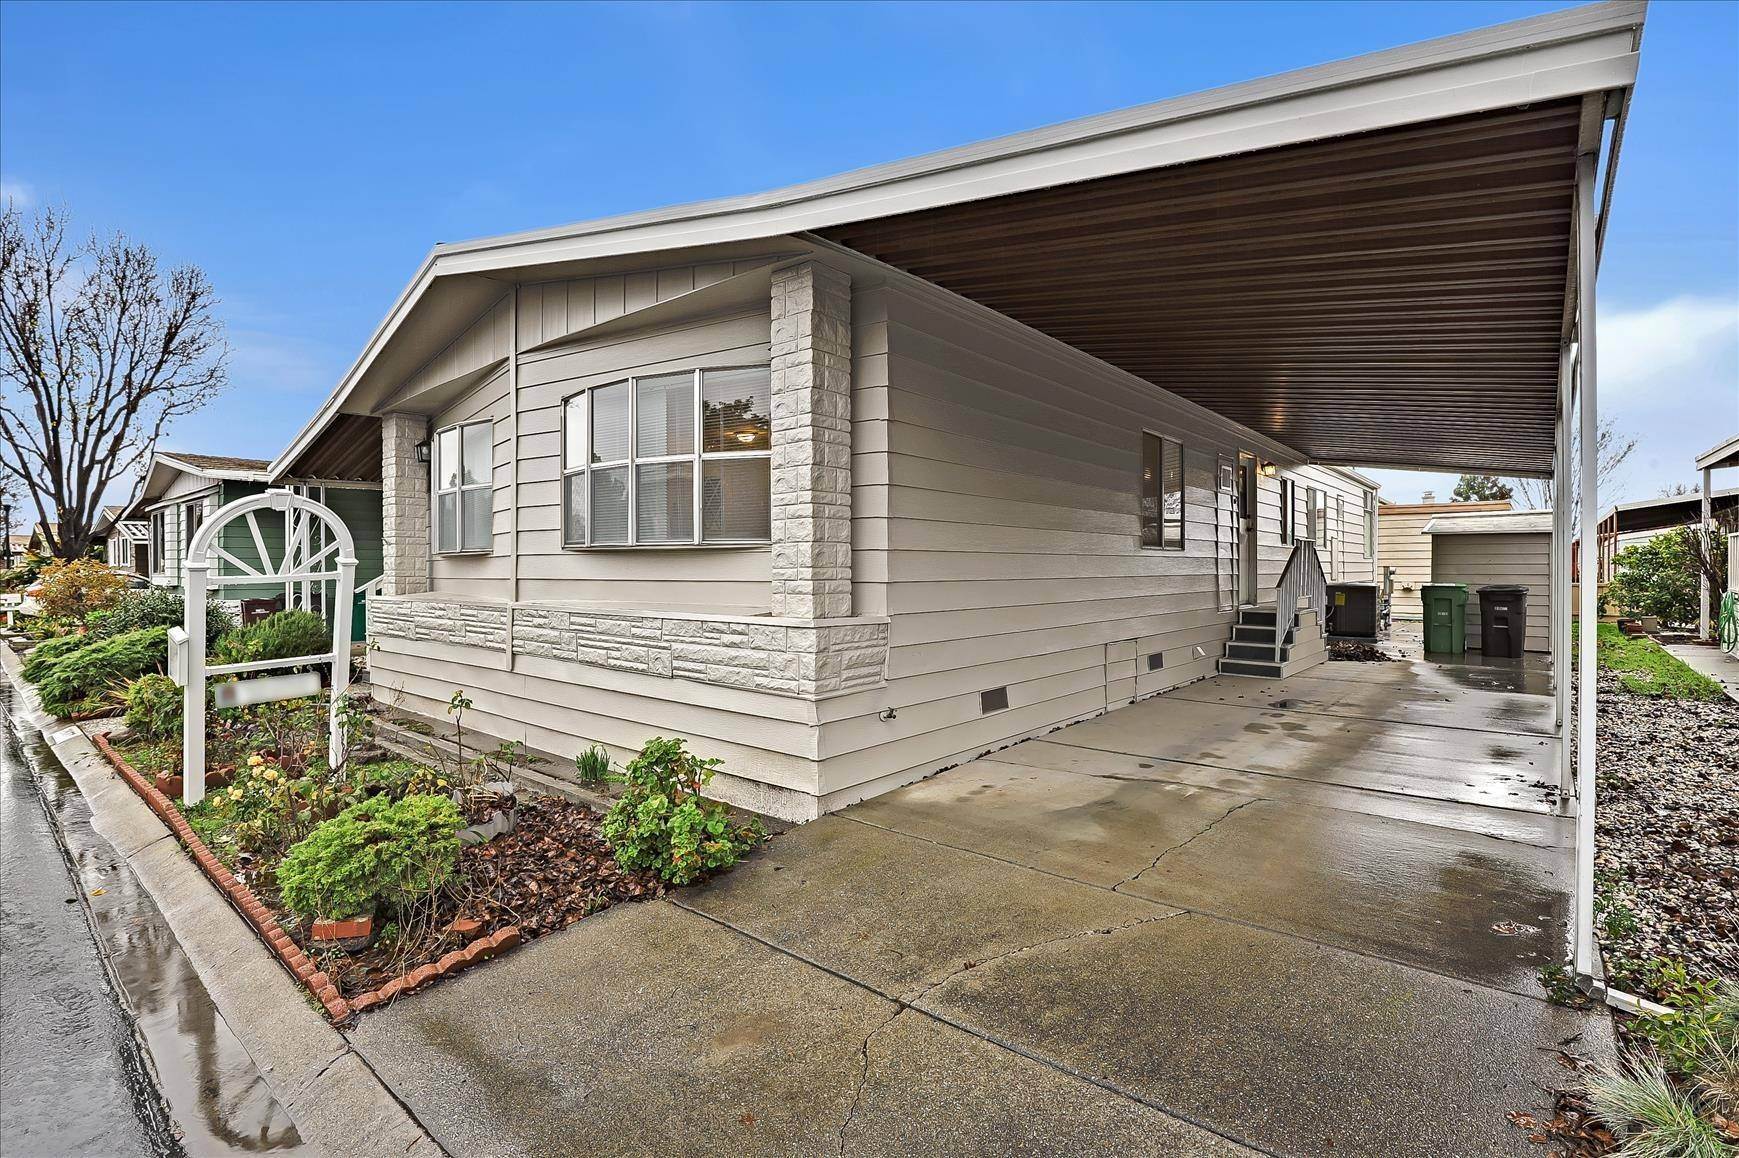 22. Mobile Home for Sale at Hayward, CA 94544